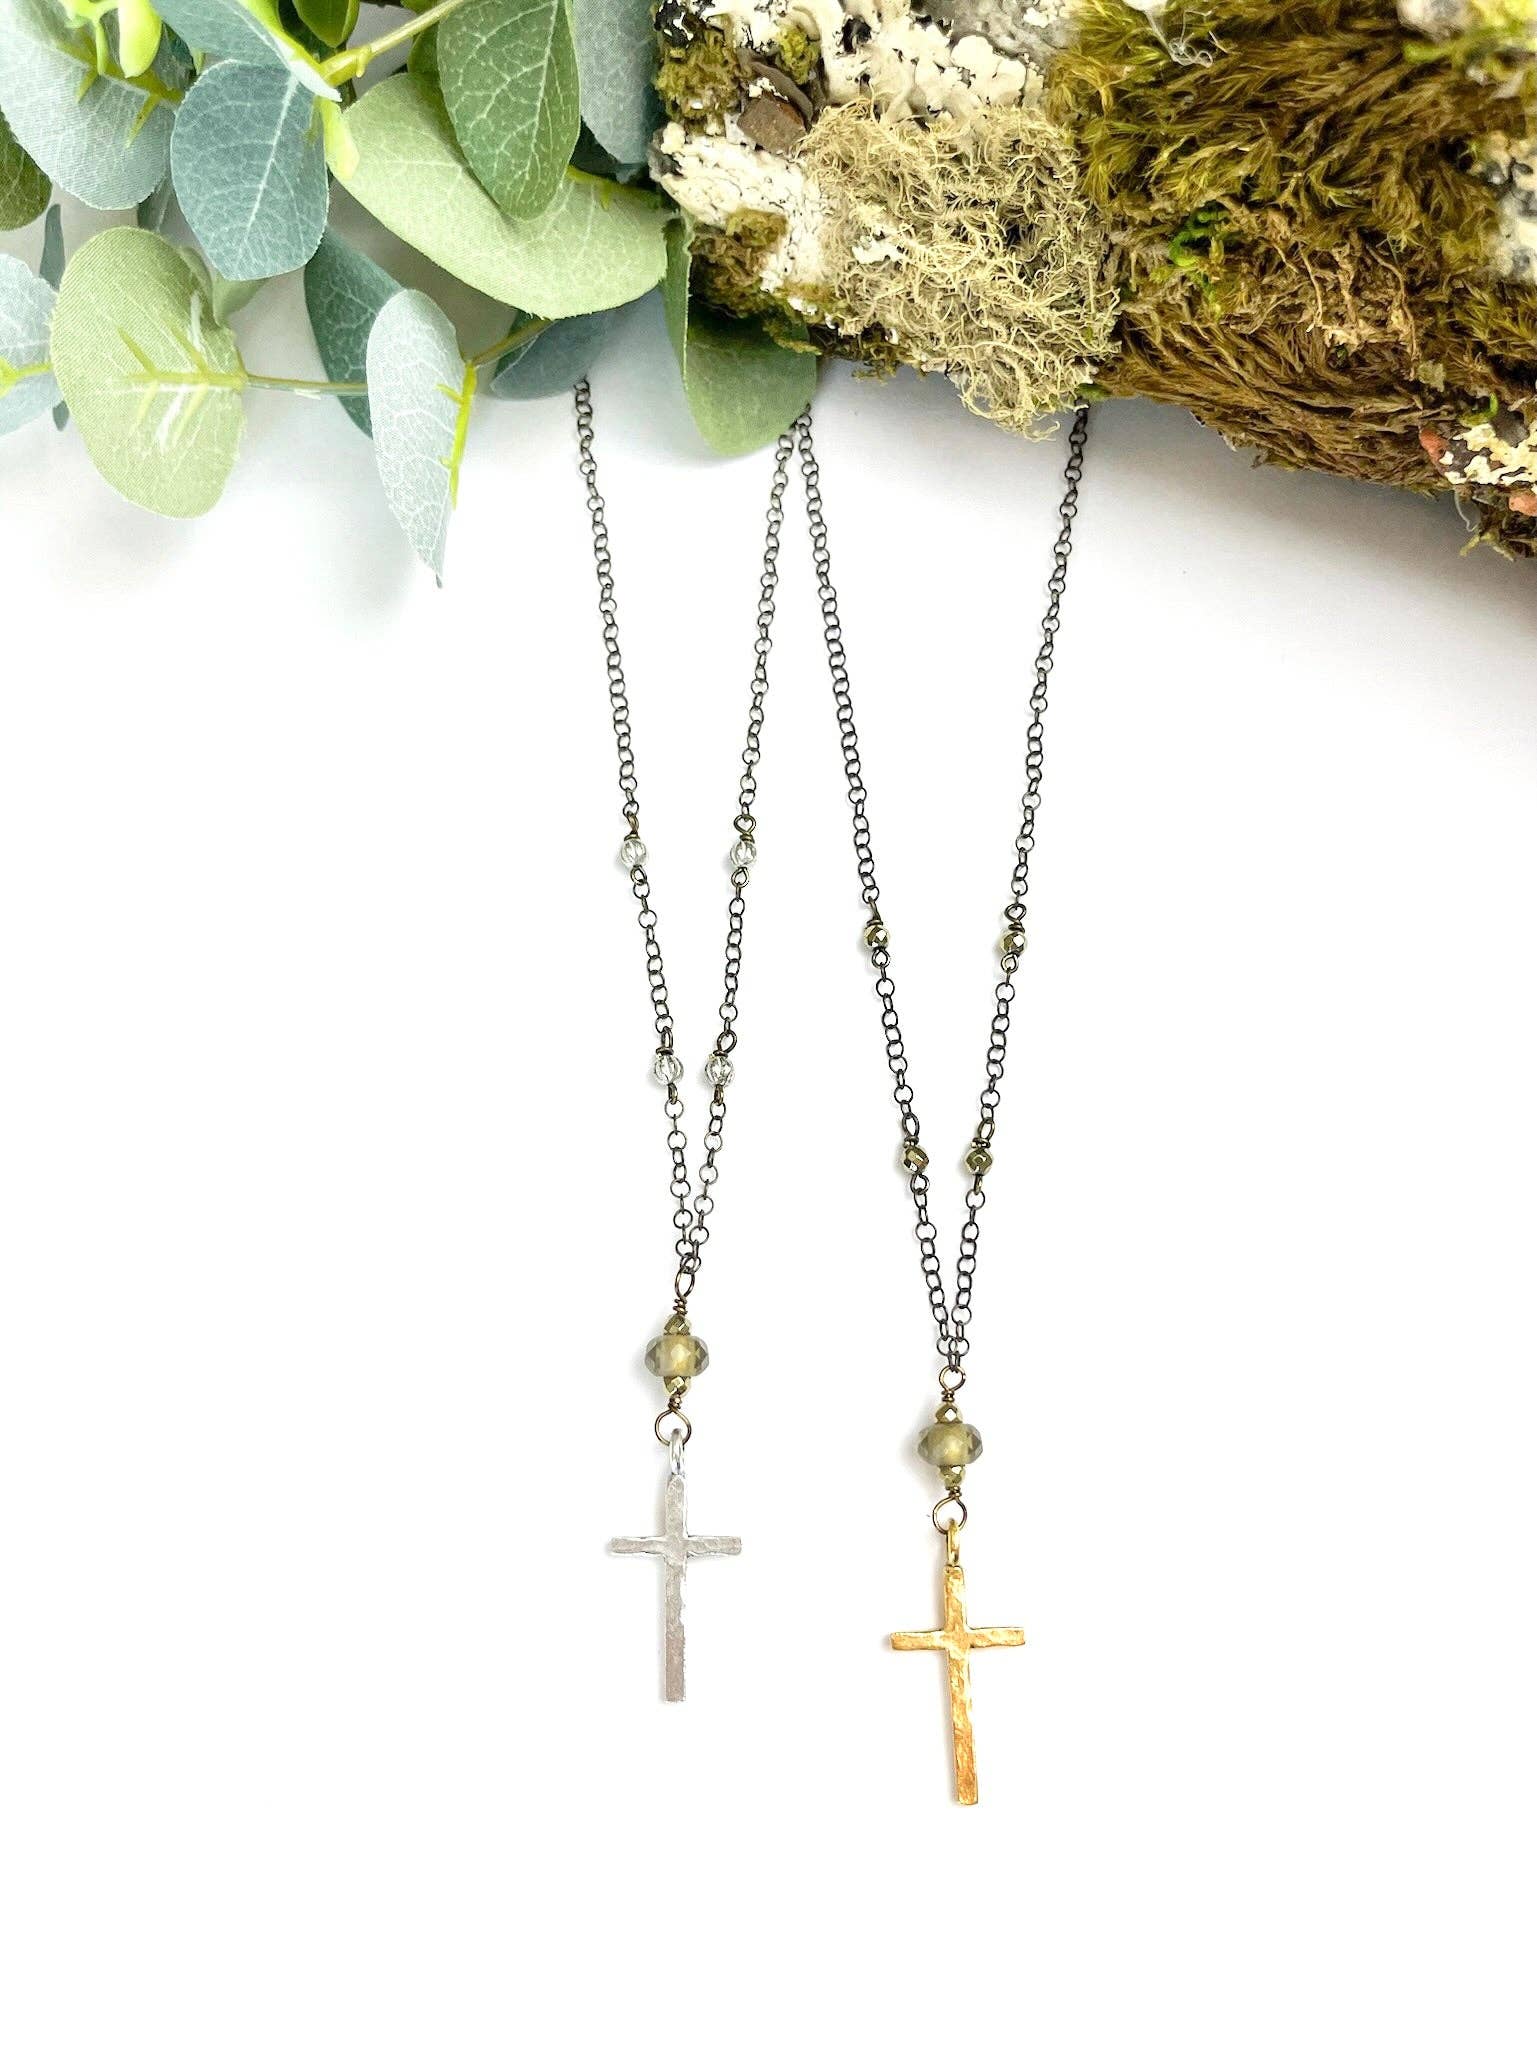 Old Time Religion Cross Necklace